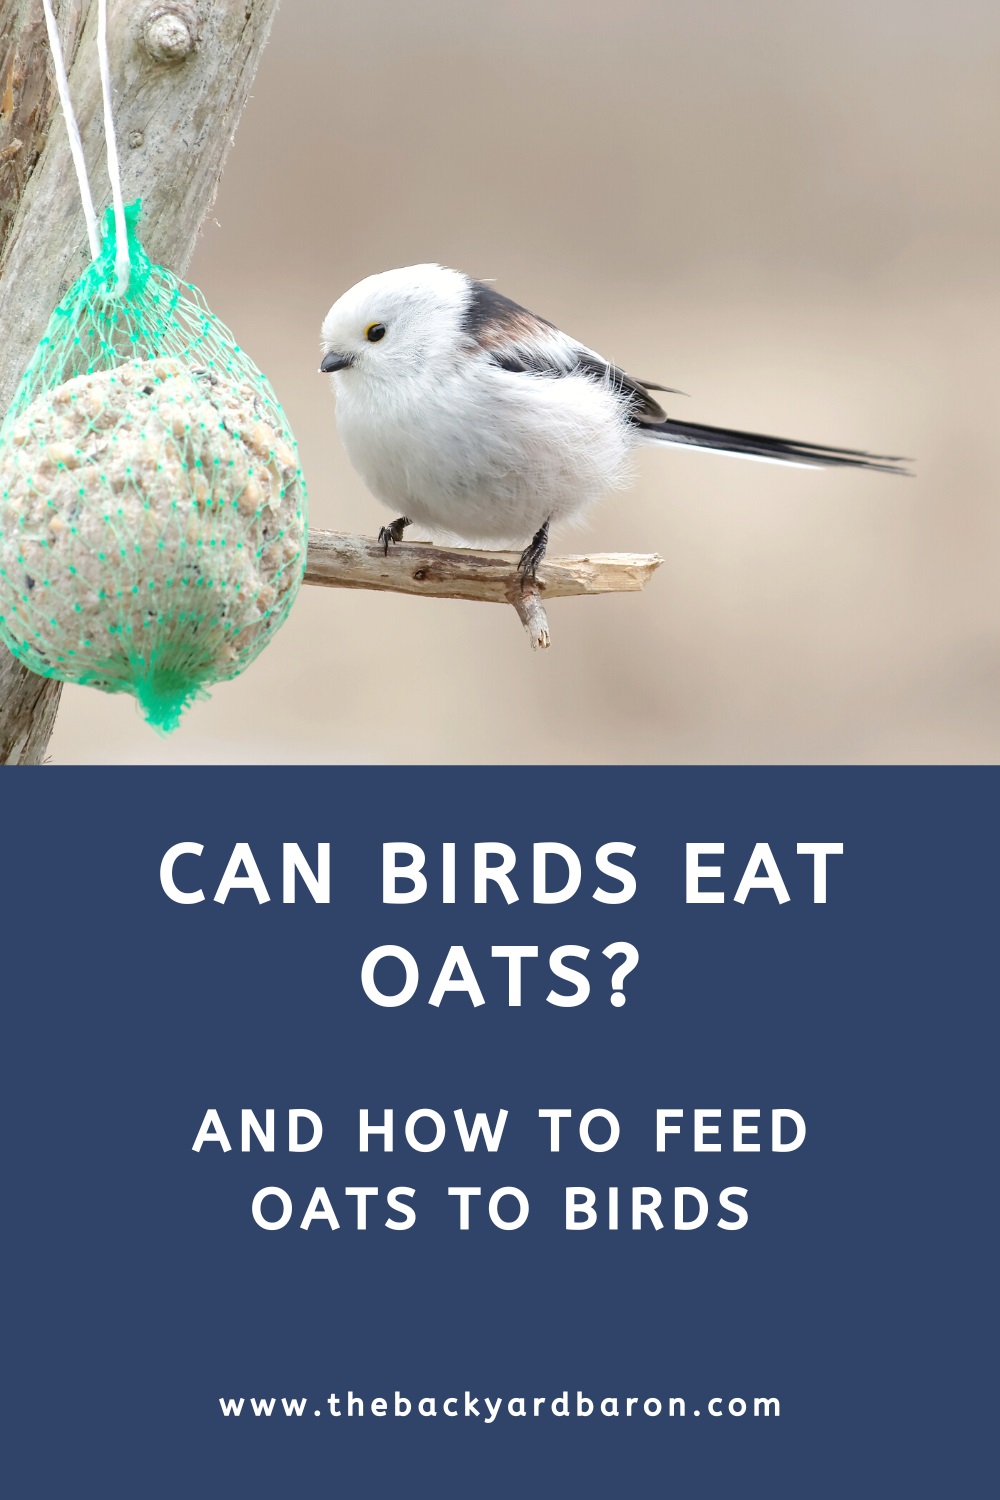 Can birds have oats?